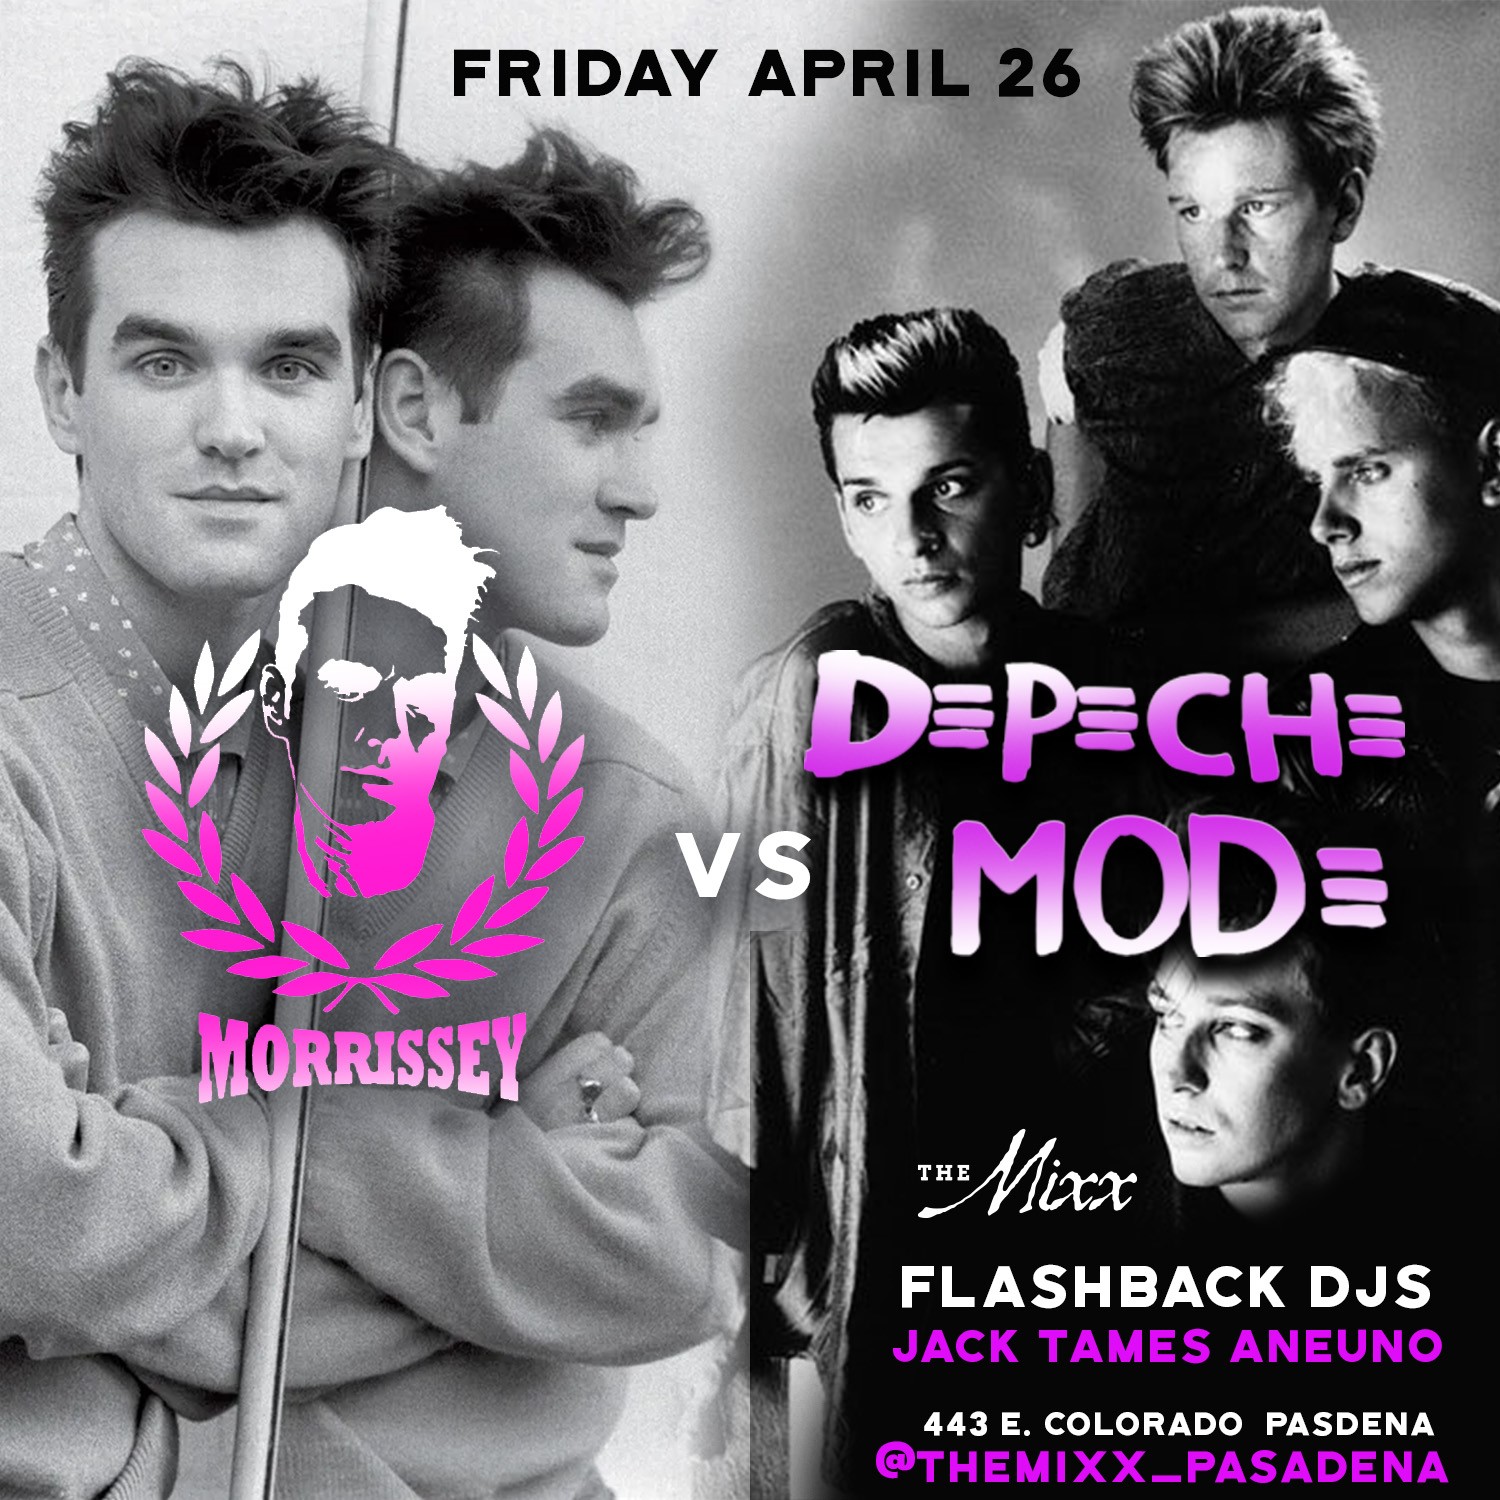 You are currently viewing Live Double Feature to Depeche Mode, Morrissey & The Smiths